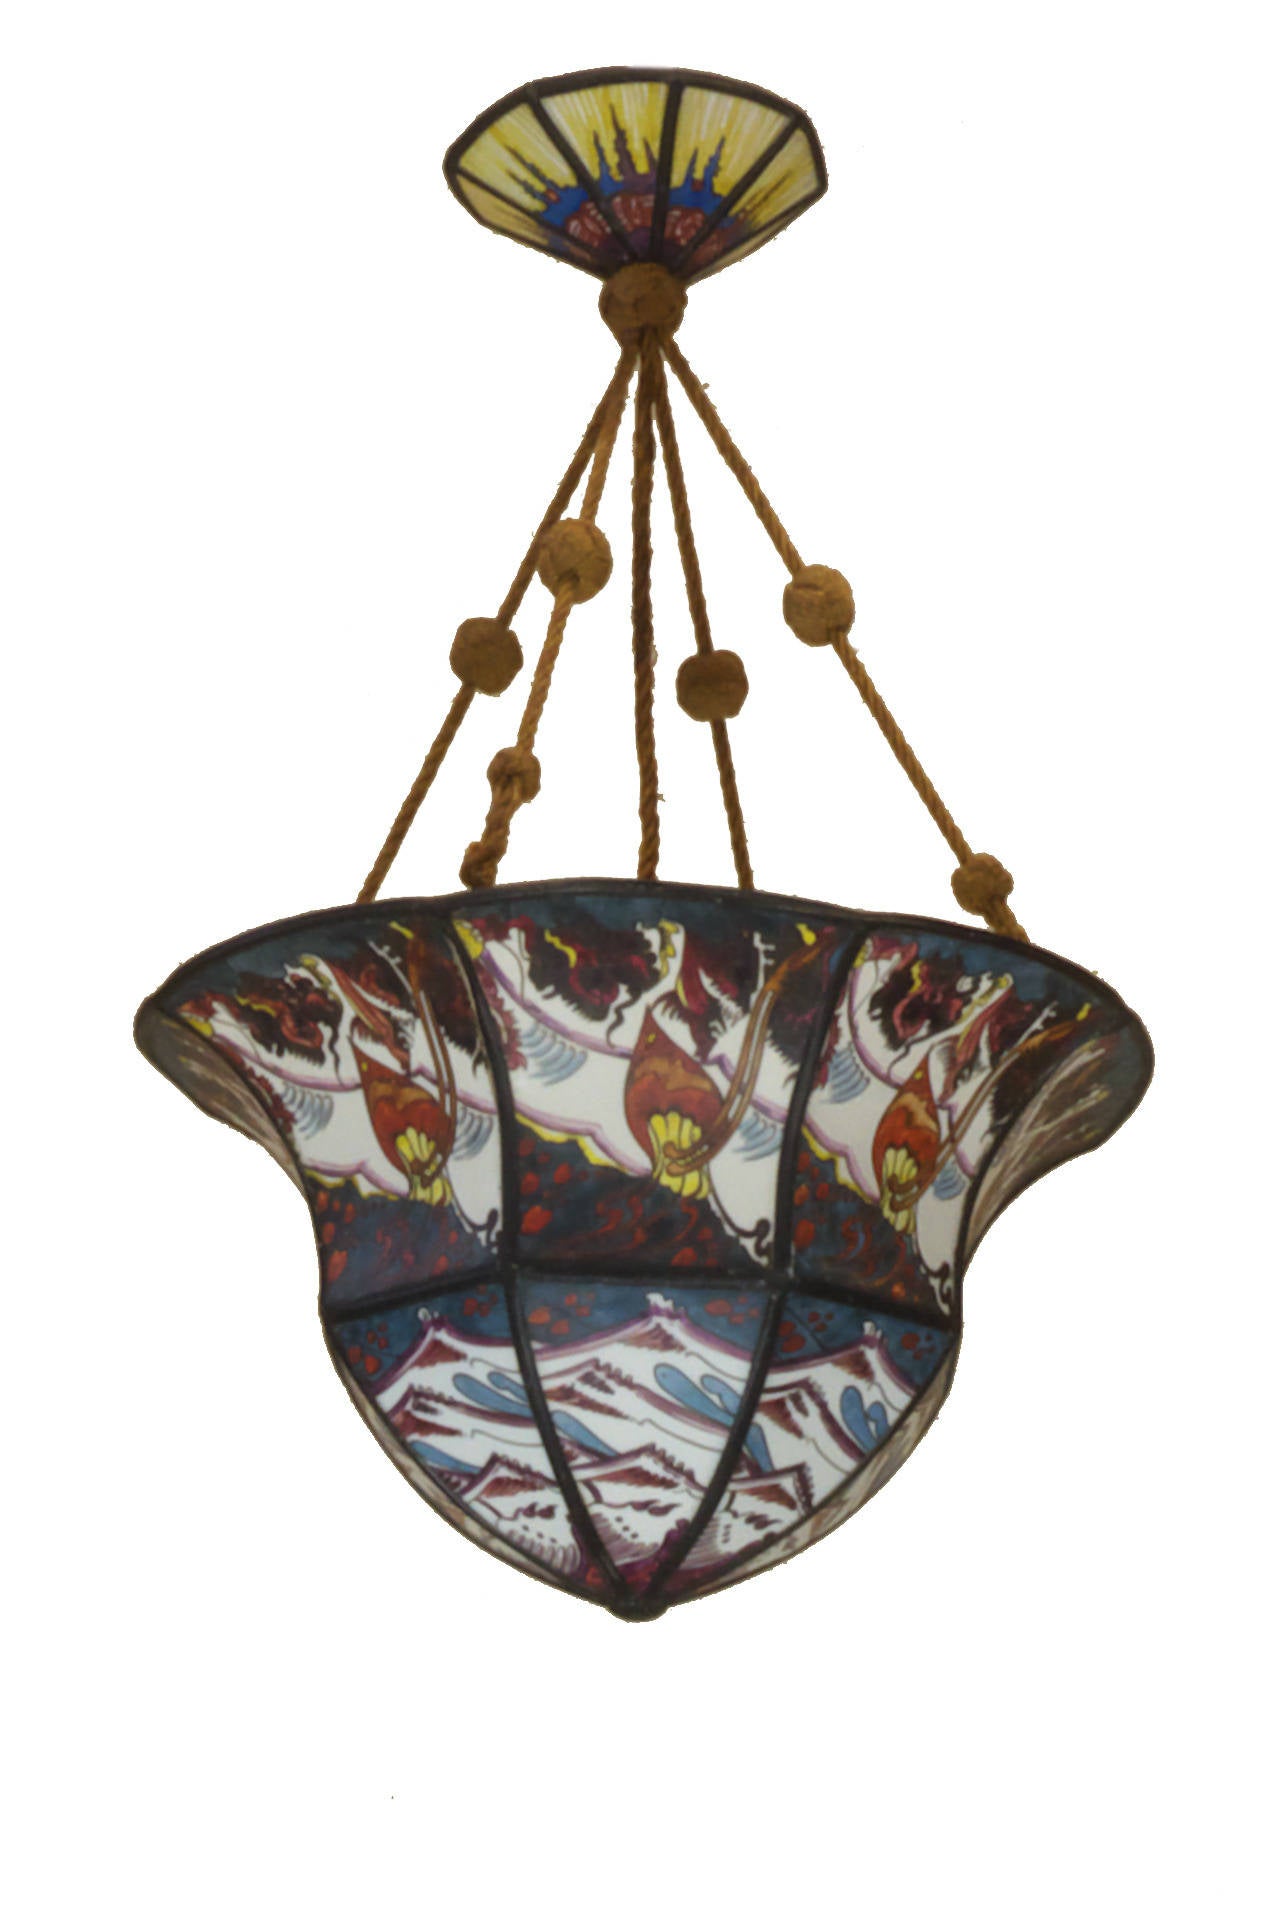 Art Nouveau Stained and Leaded Glass Lamp by Hendrik Cornelis Herens